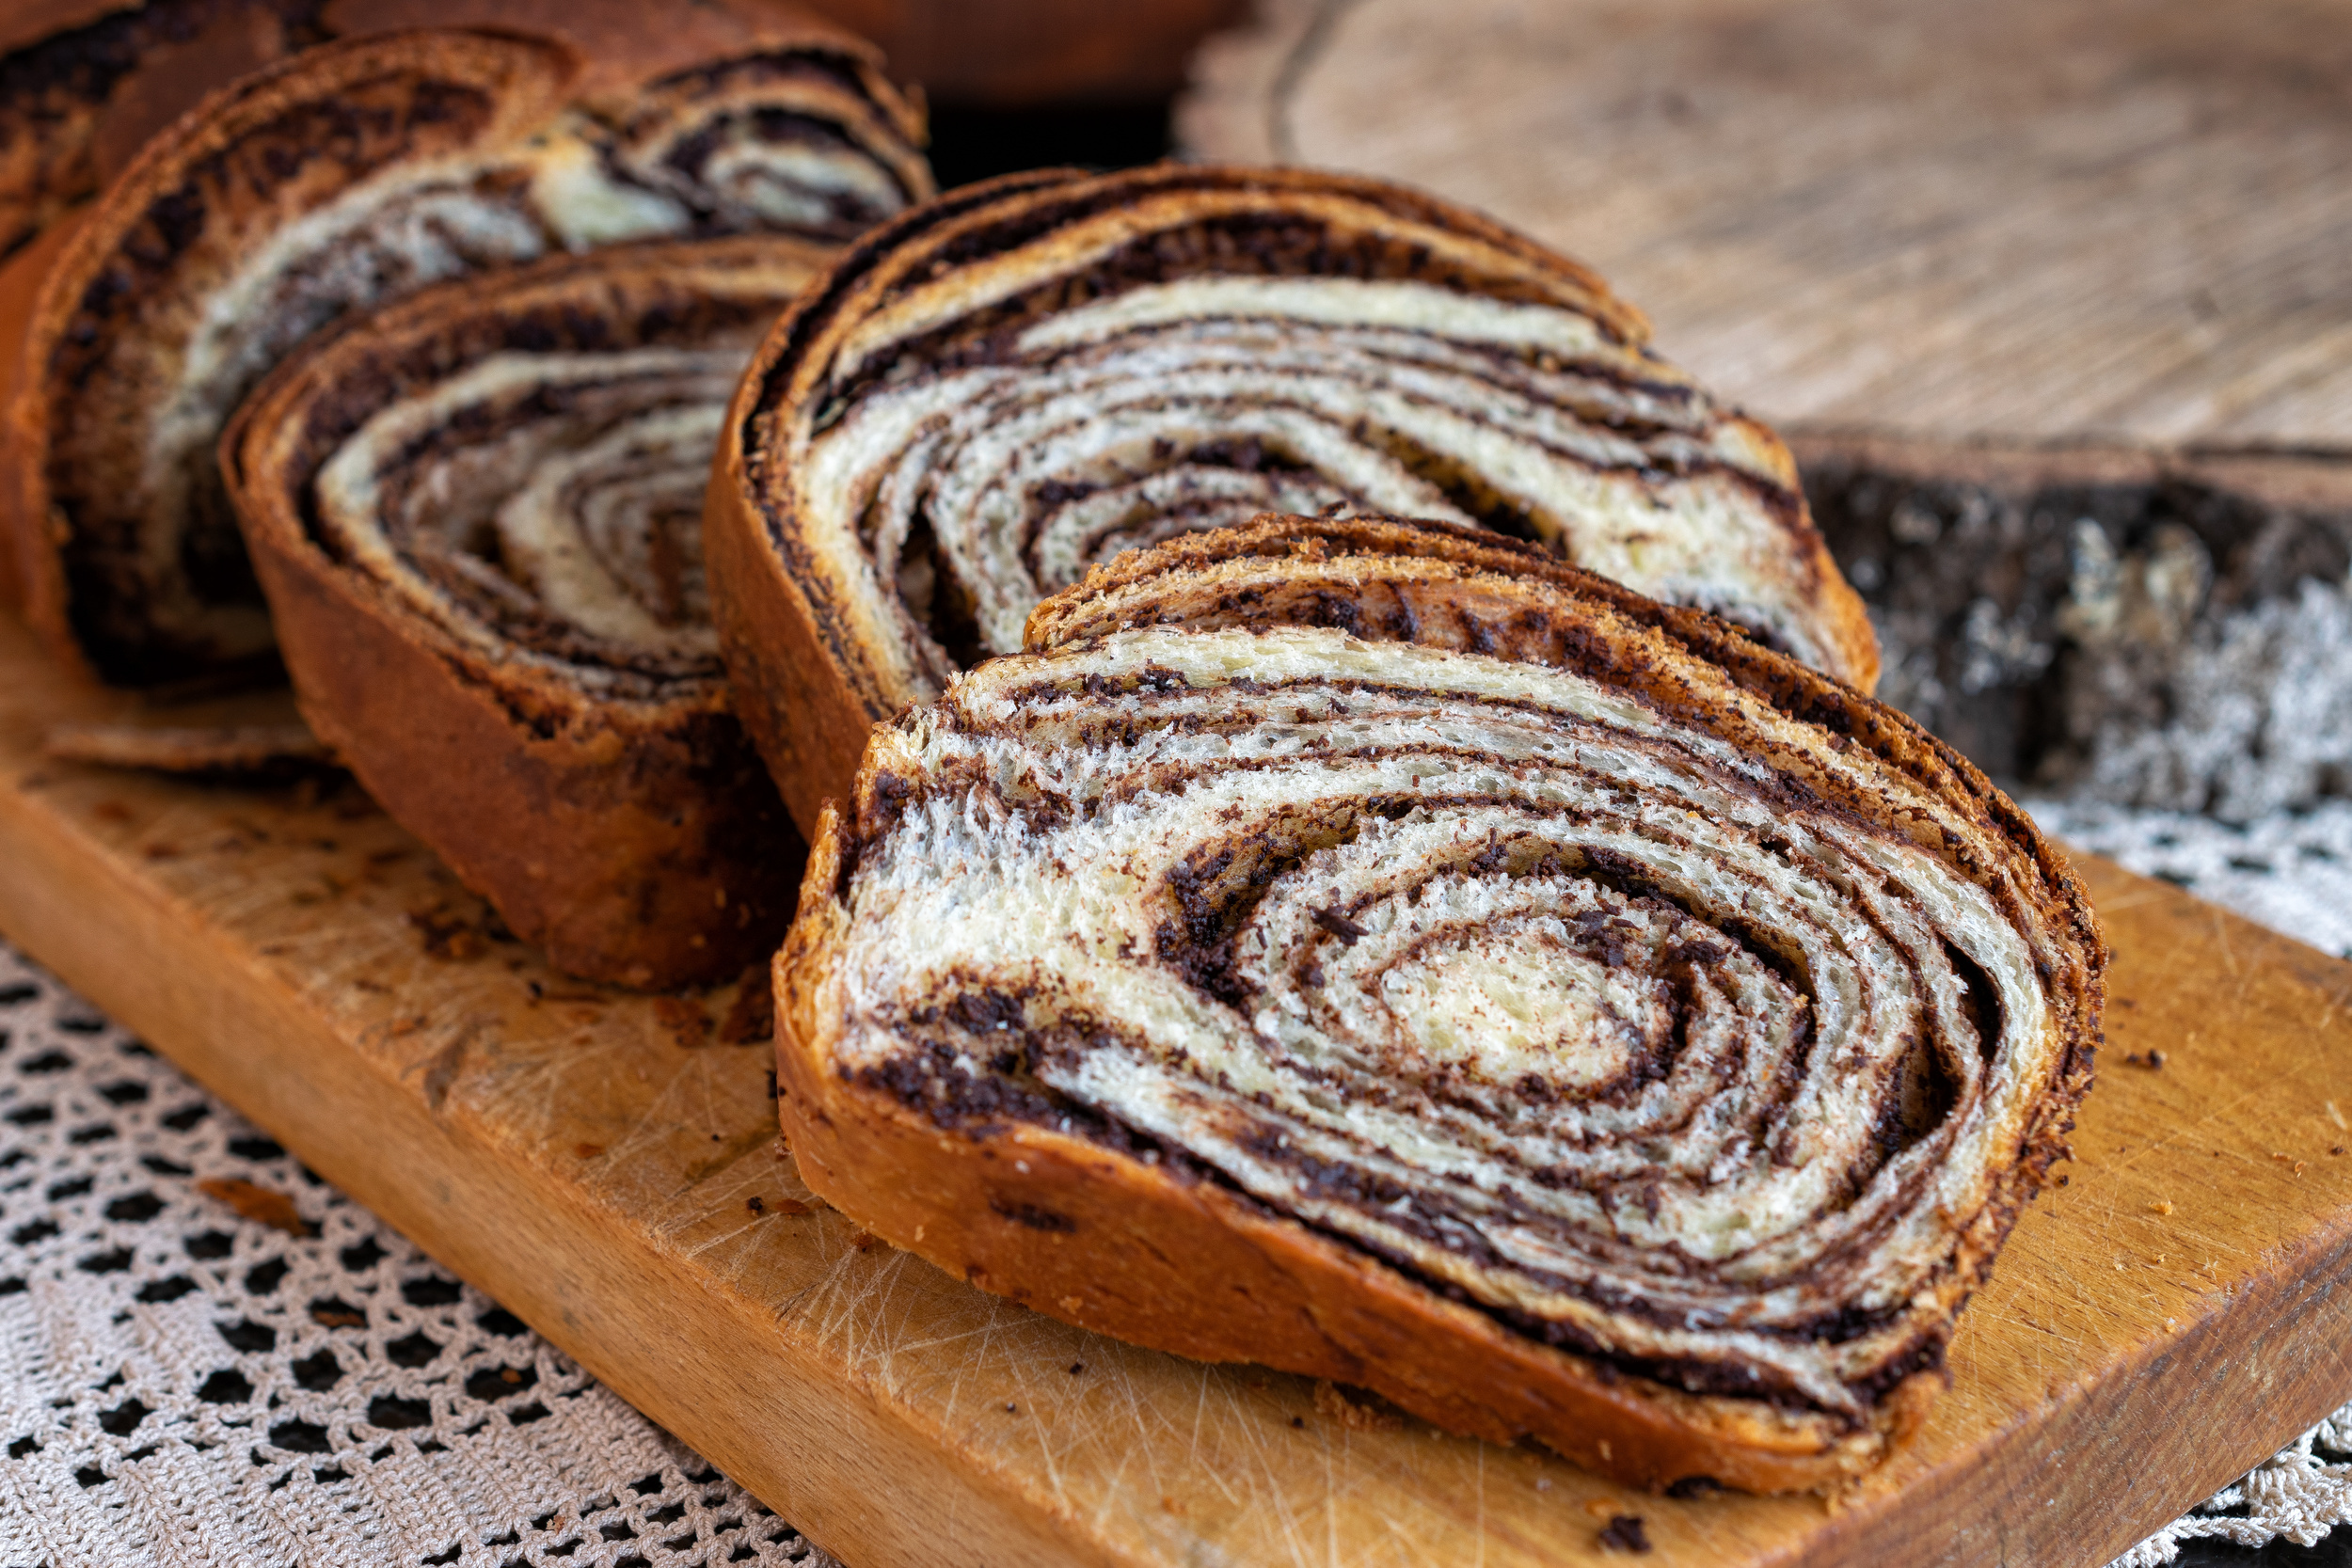 <p>If you’re unfamiliar with <em>babka</em> from Polish or Ukrainian Jewish cuisines, you might know it from the famous “Seinfeld” episode, “The Dinner Party.” As the show states, the best version of this sweet, braided bread is chocolate, which is why we’ll refer you to <a href="https://toriavey.com/chocolate-babka/"><span>this chocolate babka recipe from Tori Avey</span></a> so you can make it yourself.</p><p>You may also like: <a href='https://www.yardbarker.com/lifestyle/articles/25_recipes_that_include_panko/s1__38546170'>25 recipes that include panko</a></p>